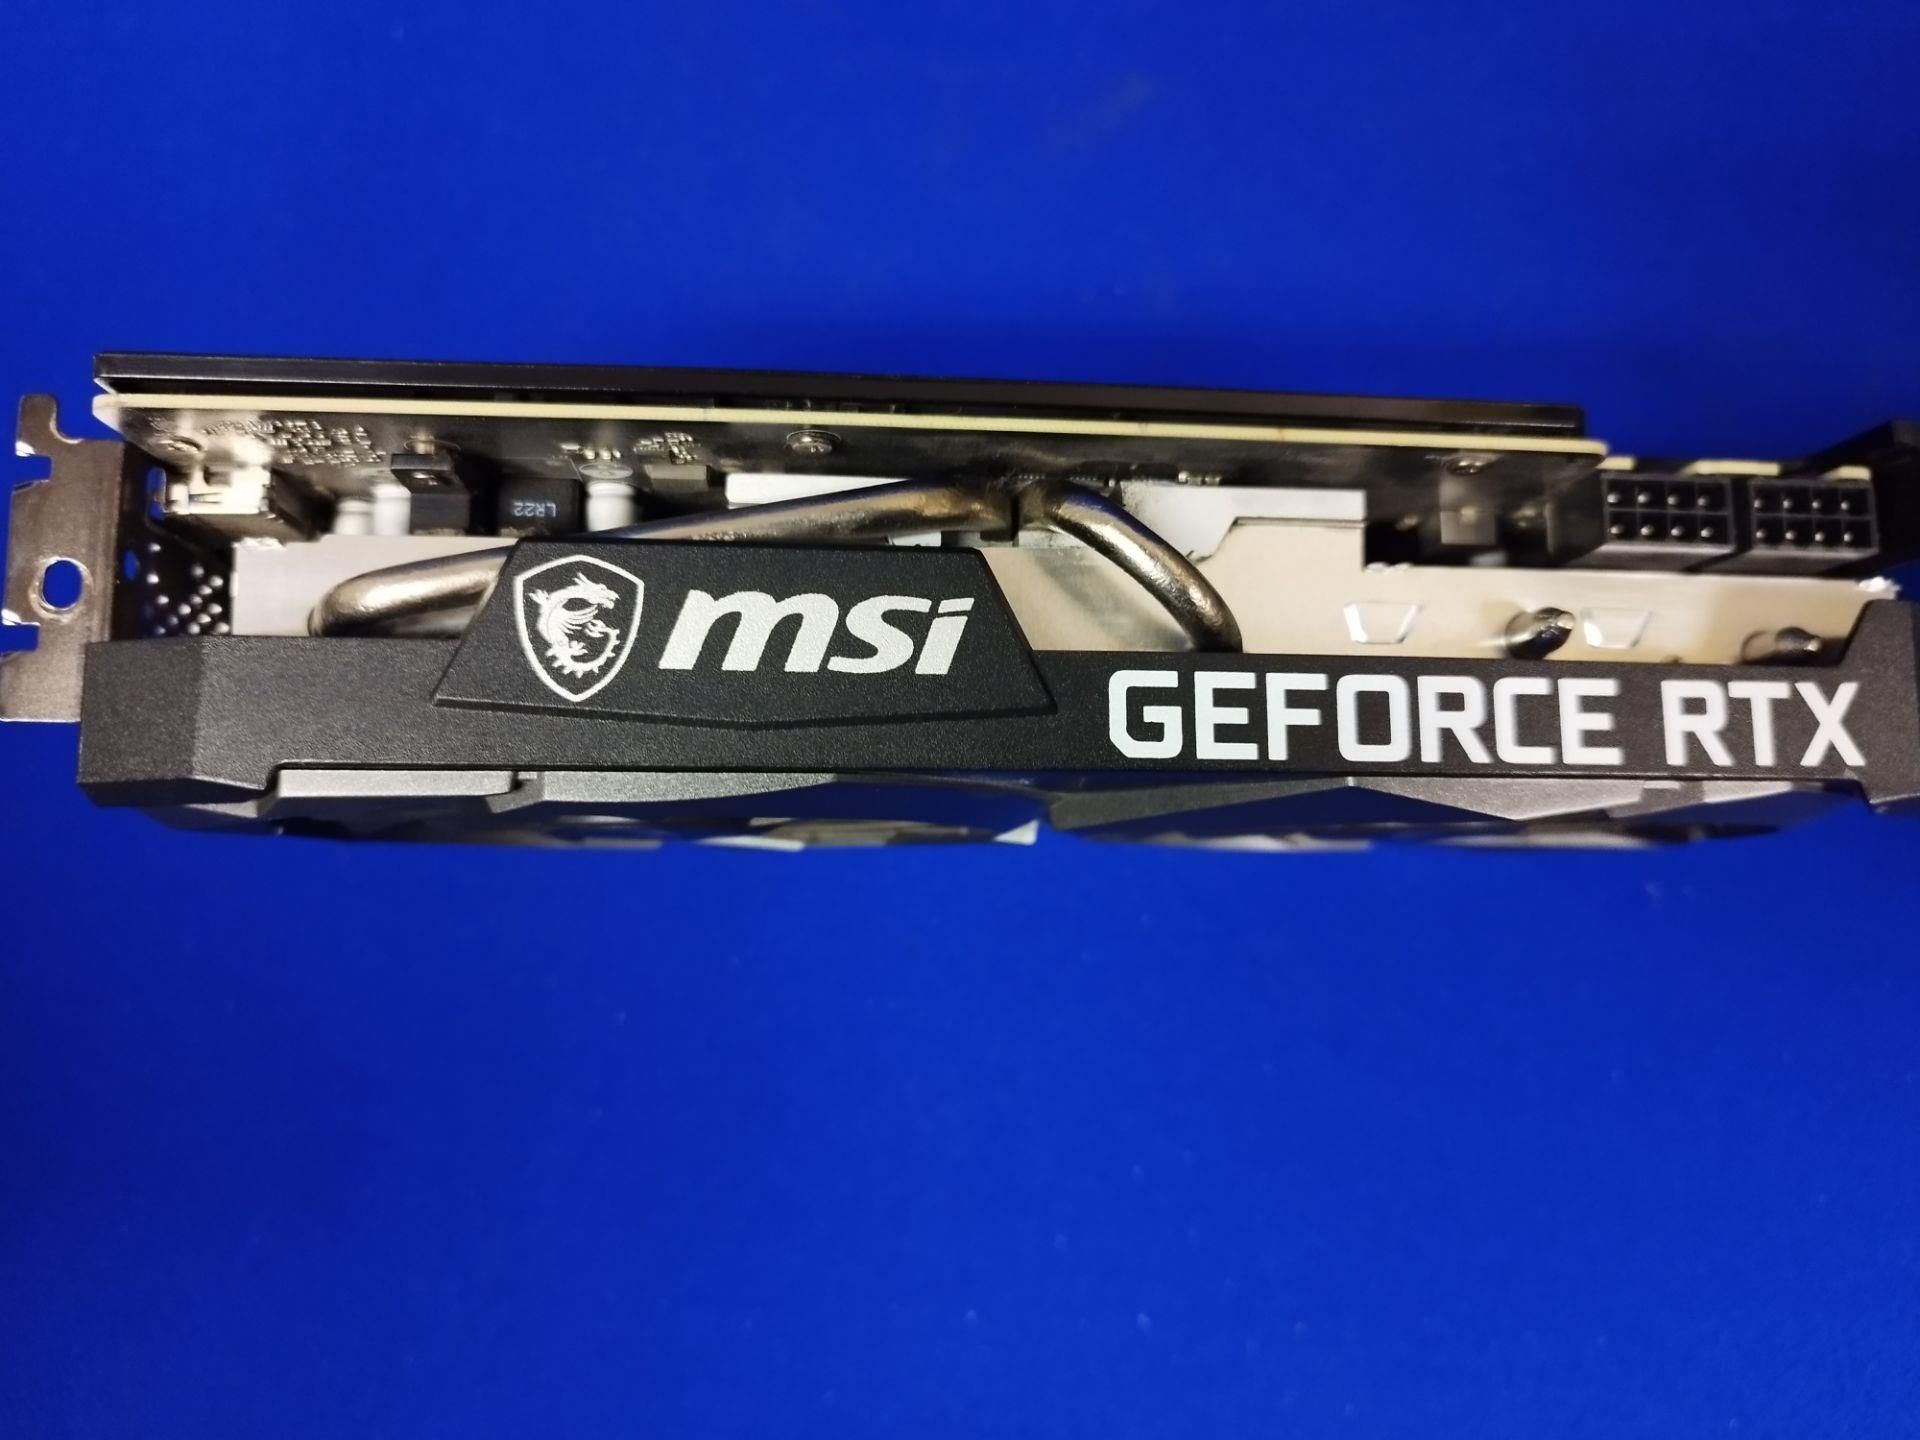 Nvidia GeForce RTX 3070 Graphics Card - Used - PLEASE SEE PHOTOS - Image 5 of 7